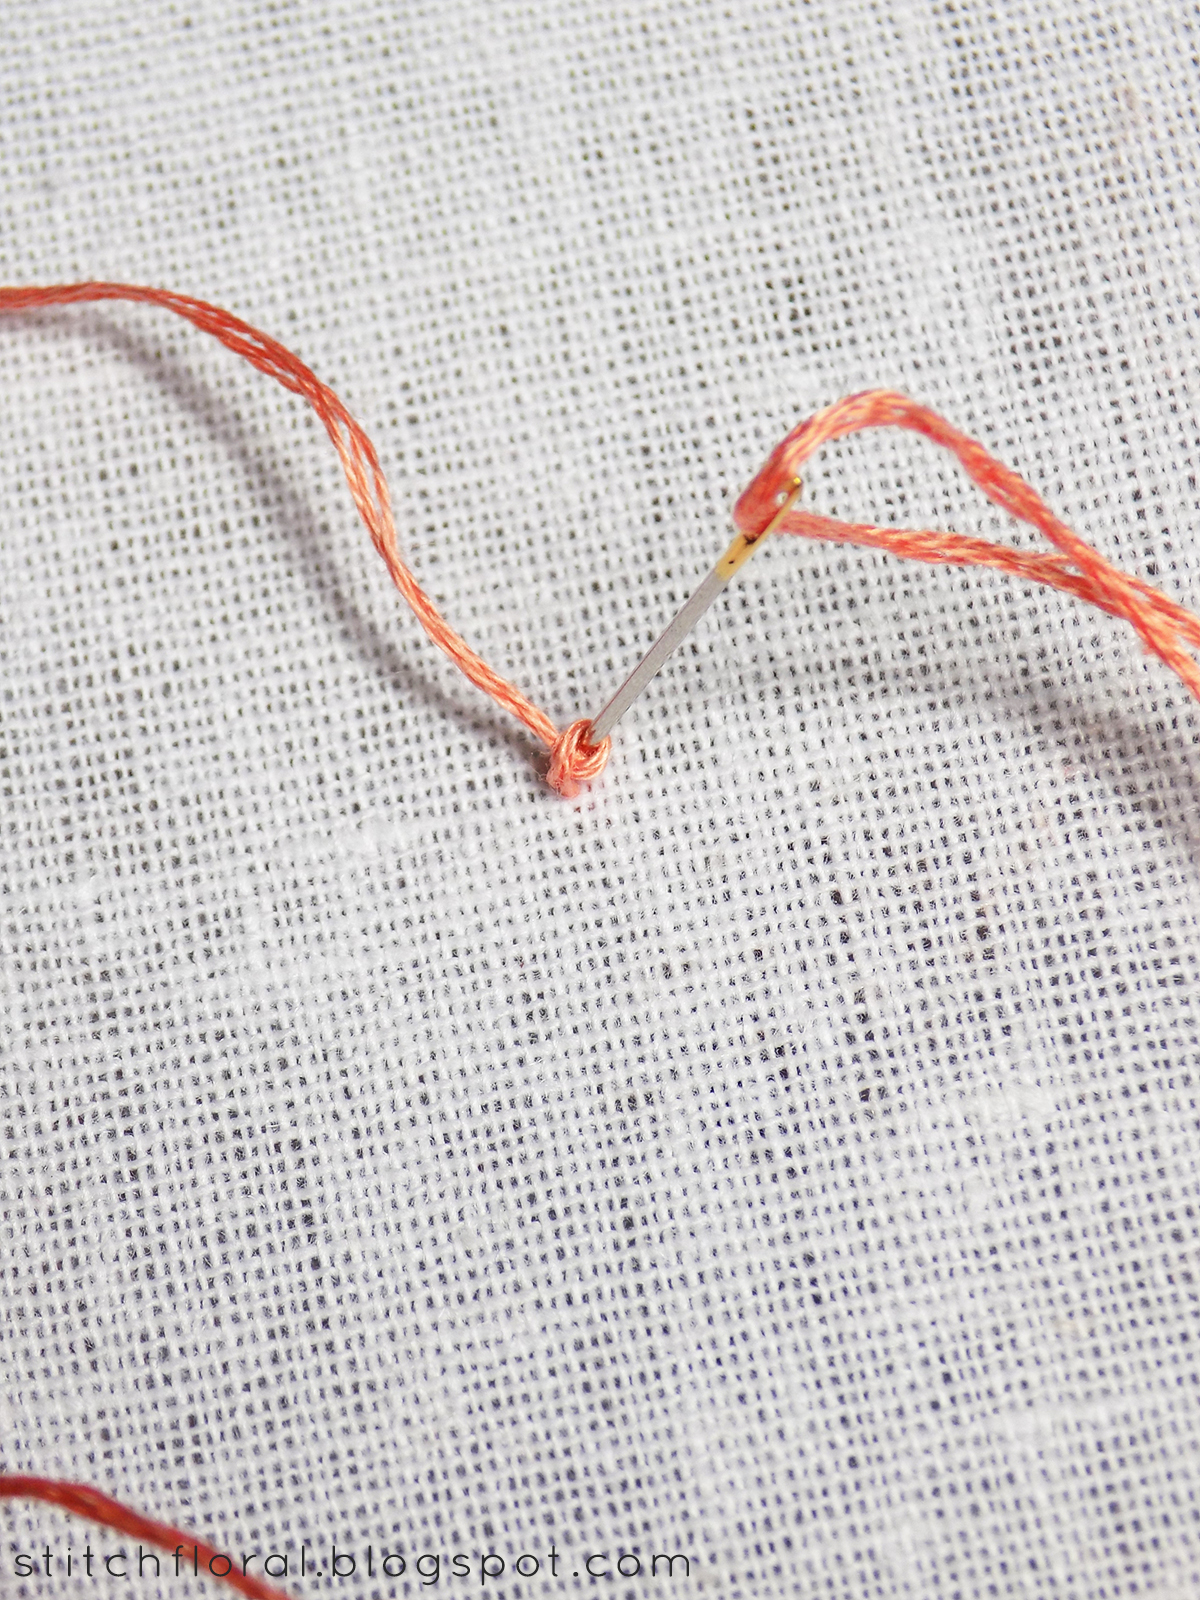 Colonial knot and how's it different from french knot?